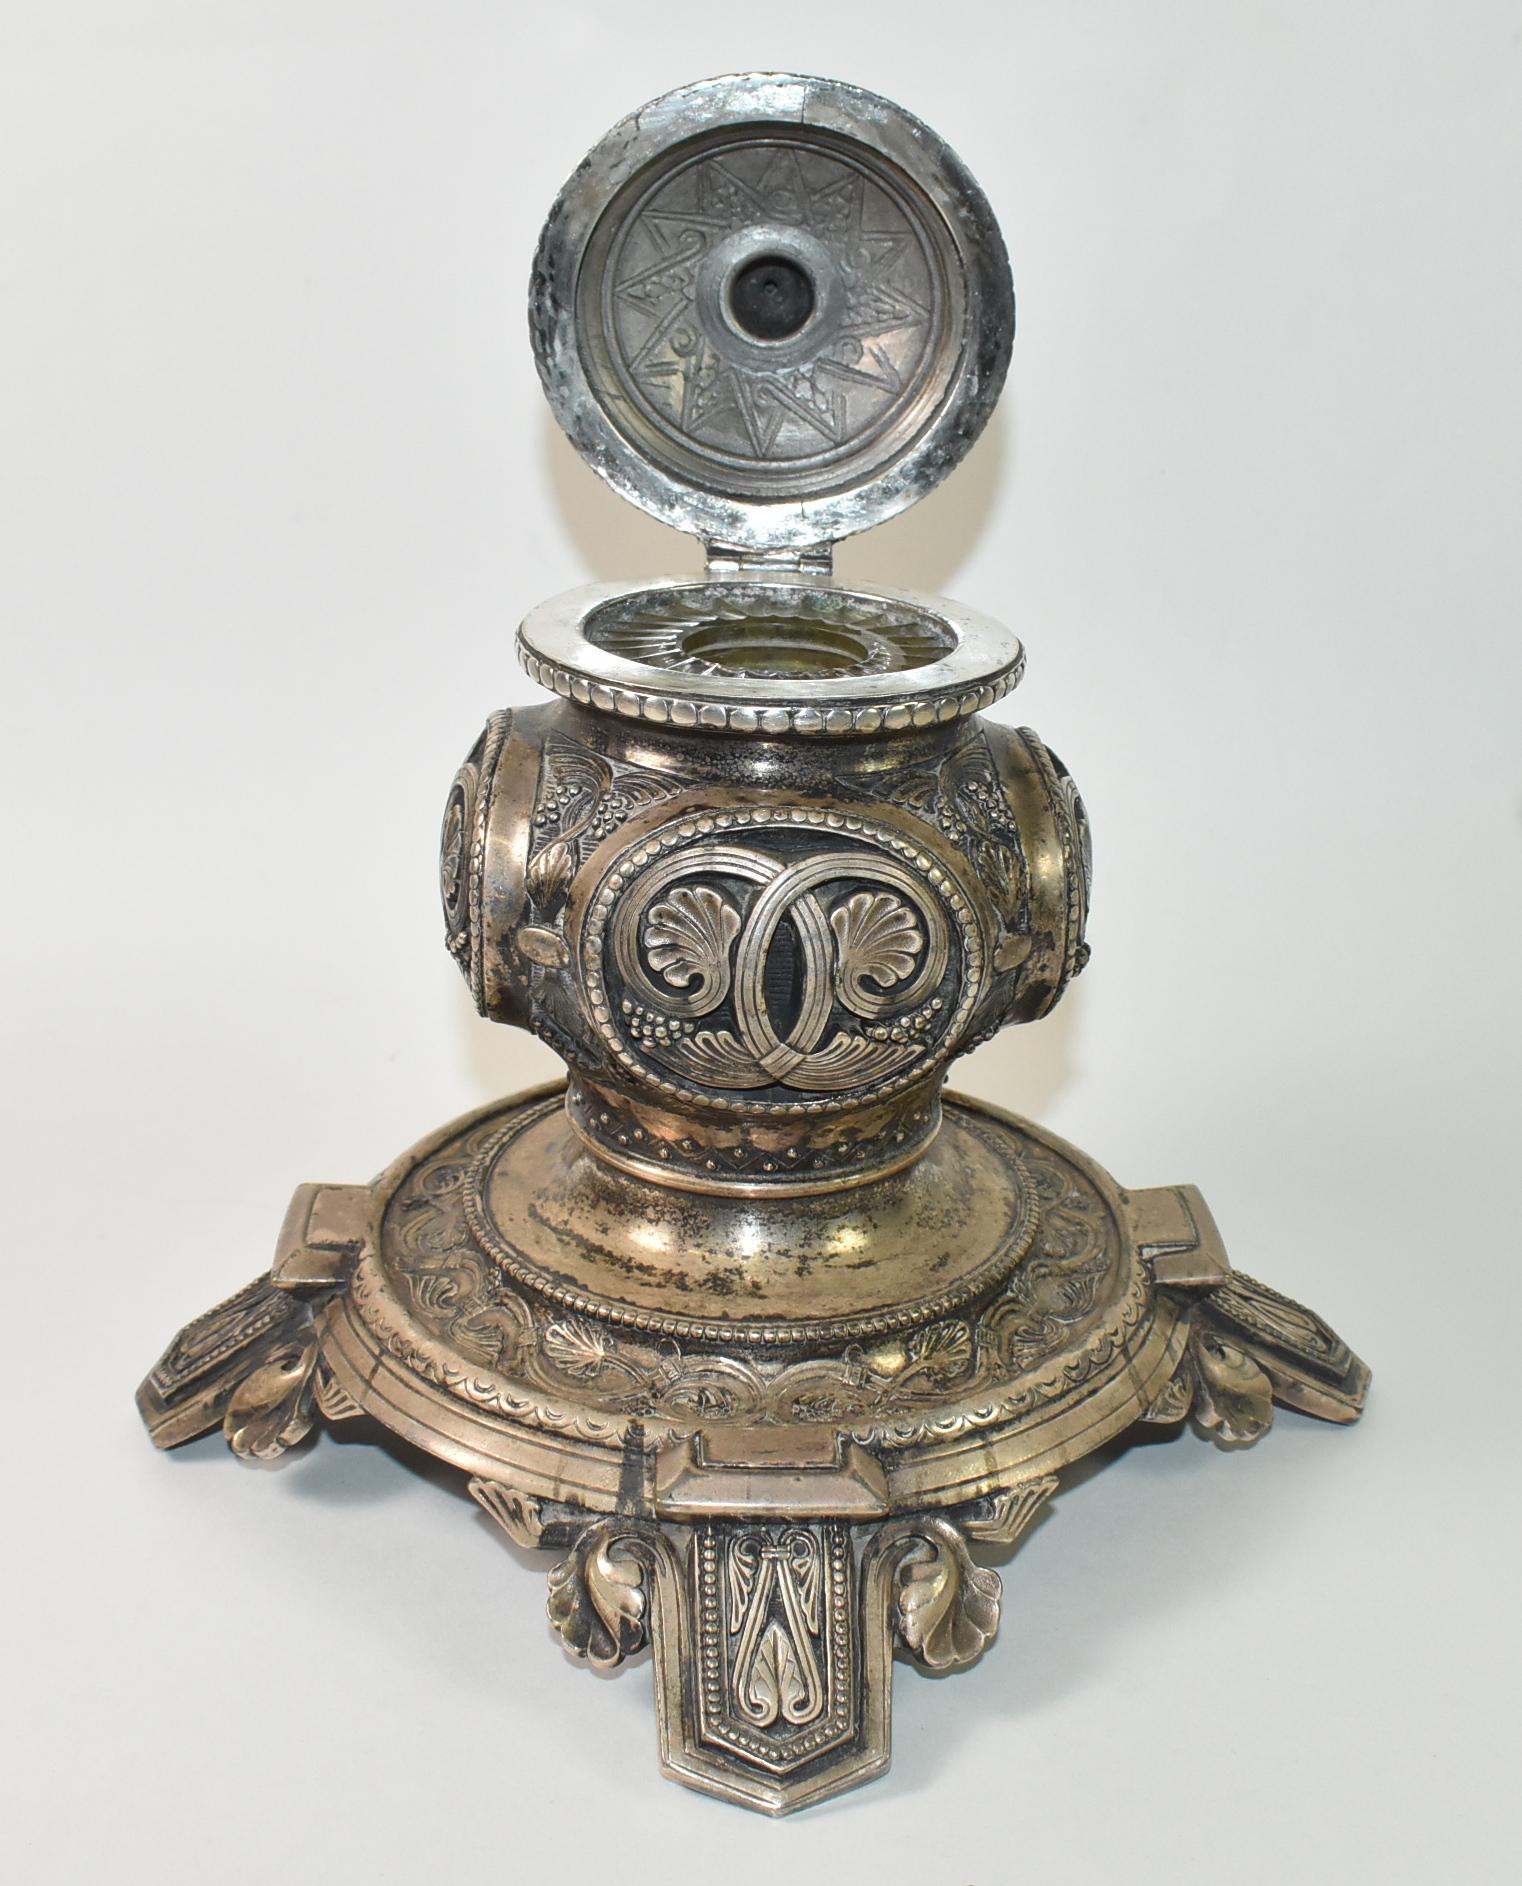 This antique Edwardian inkwell from 1890 is covered in ornate detailing and was made by Elkington. Elkington was established in 1830's - 1963 in Birmingham, England. This inkwell has four decorative feet with leaves and art deco geometric design